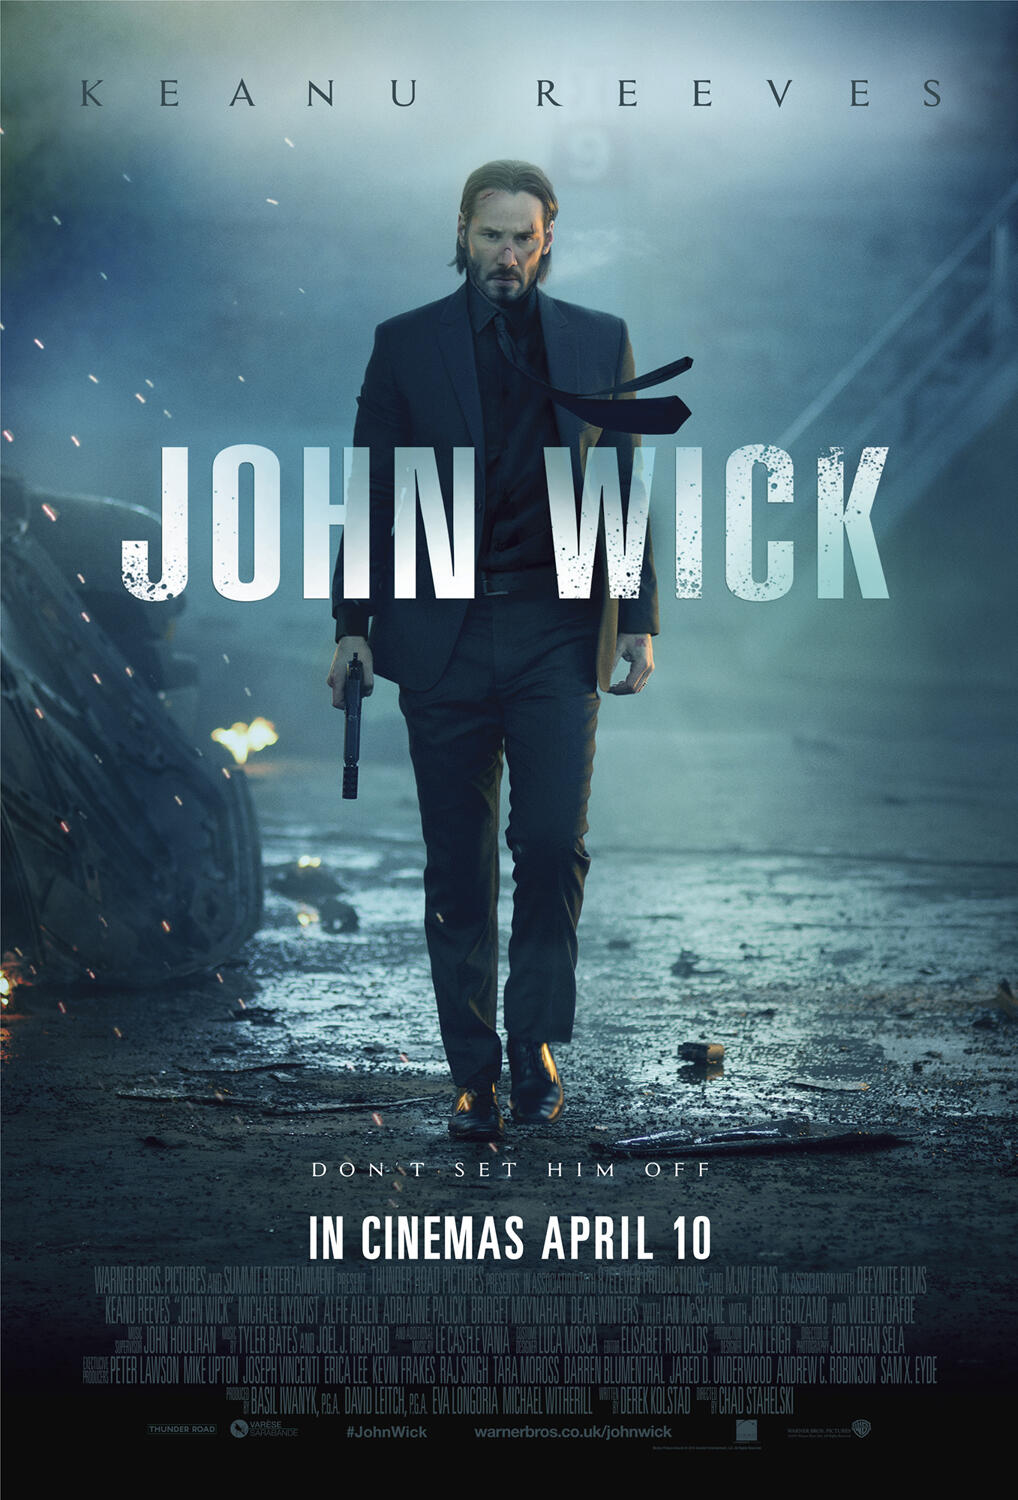 John Wick and Focus Review Upodcast - Upodcasting- Under Promise Over Deliver